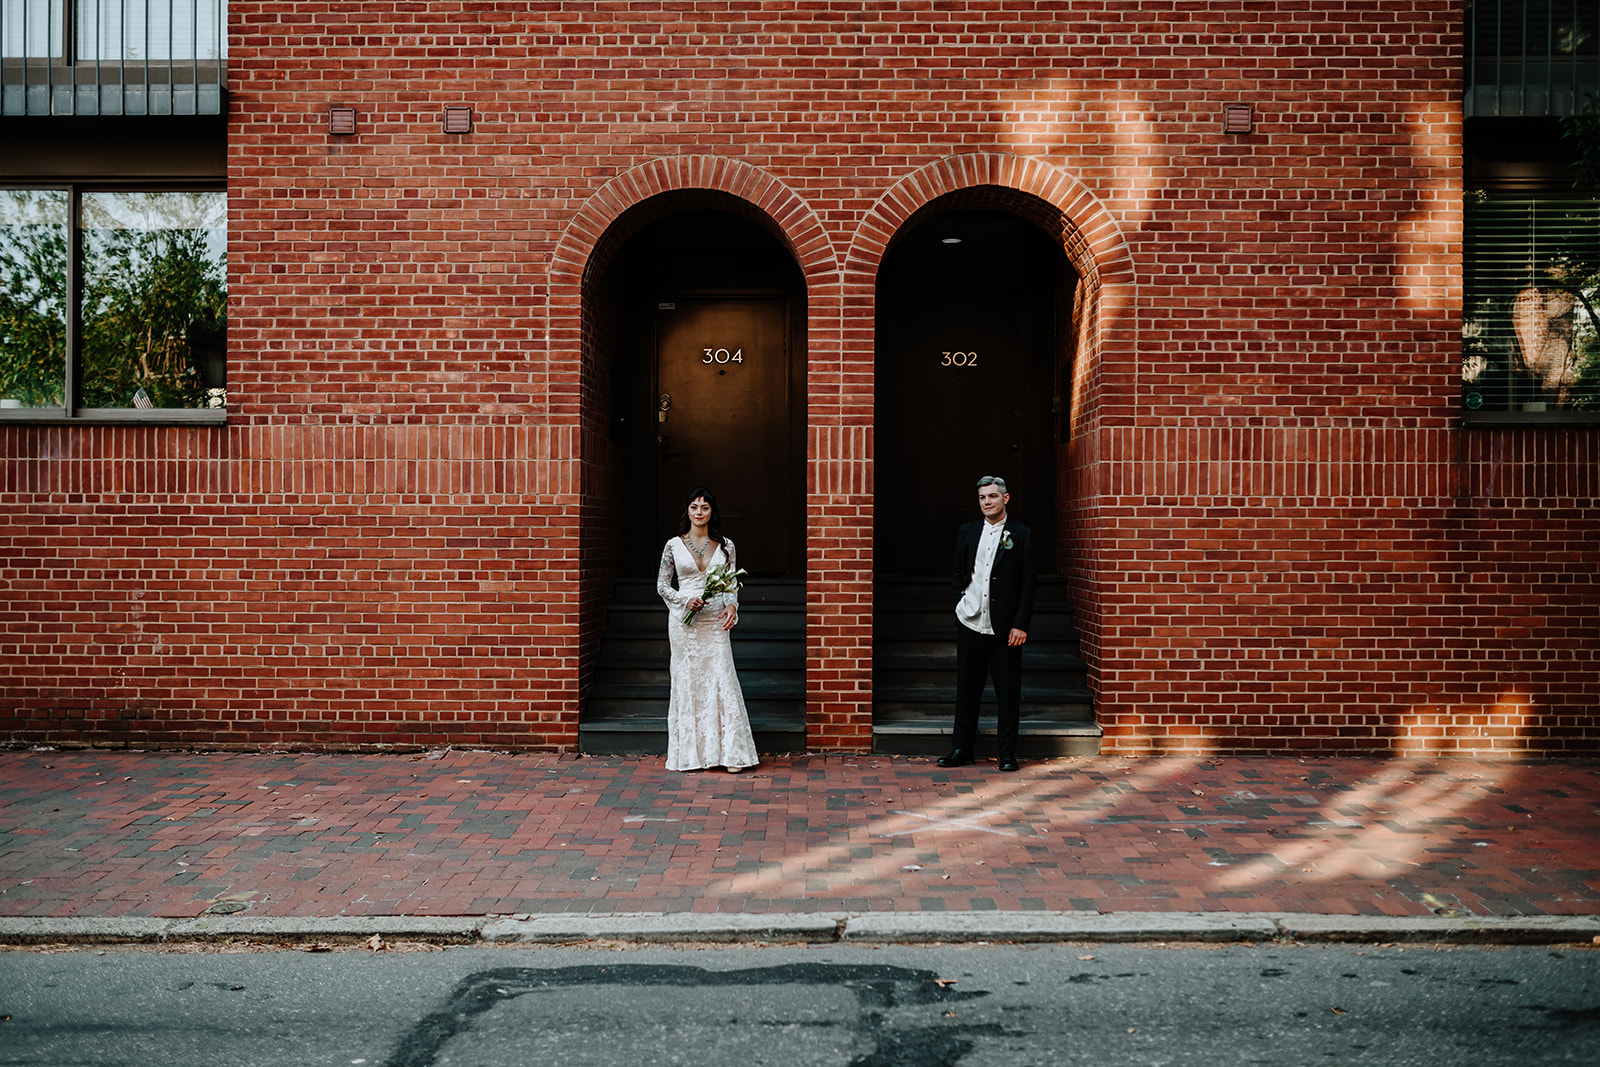 bride and groom in front of brick building society hill philadelphia